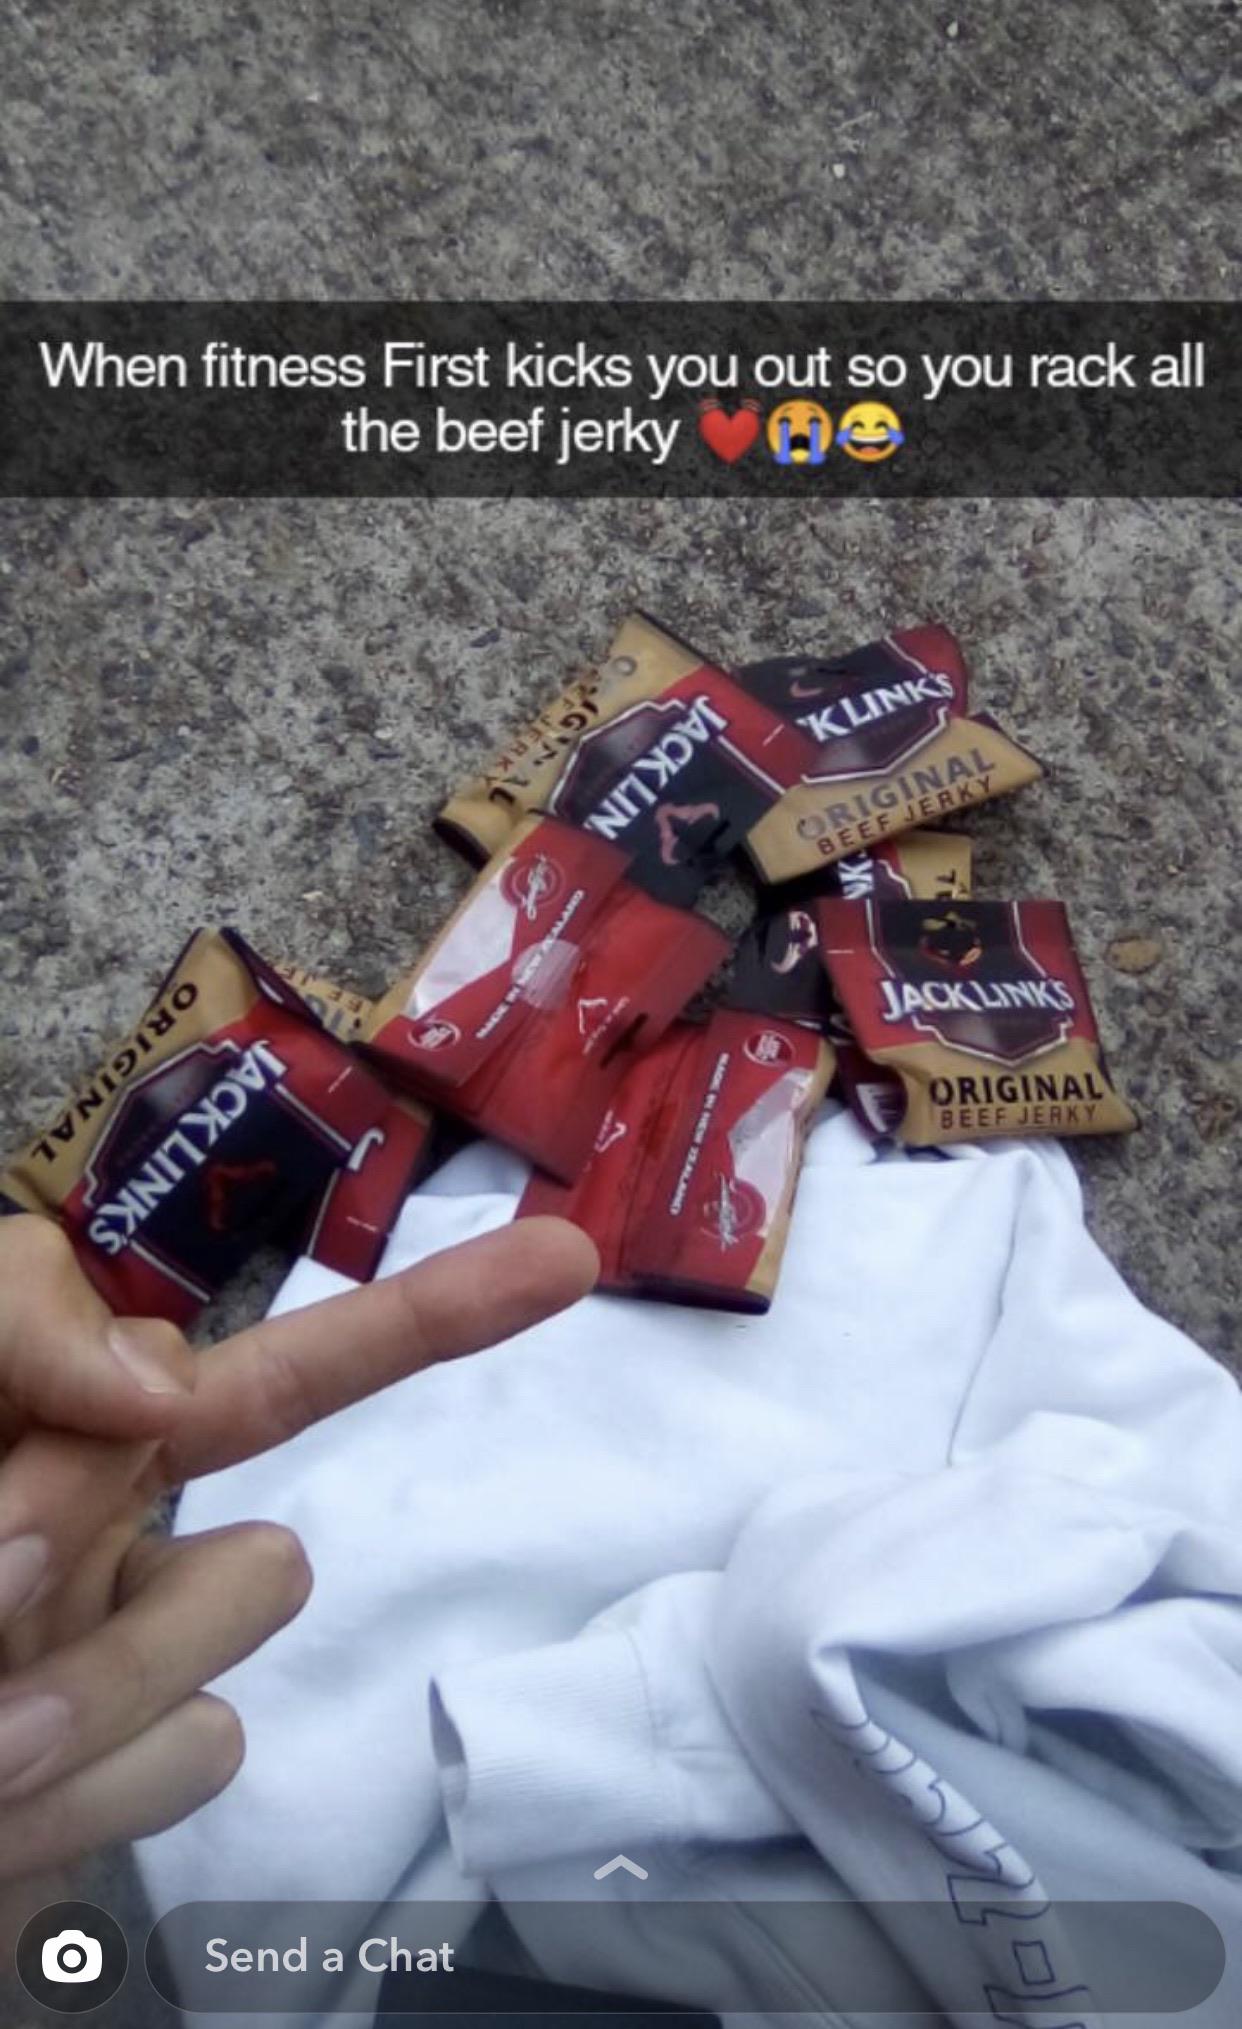 When fitness First kicks you out so you rack all the beef jerky Os Klink'S Jacklin Origina See Erky Jack Links Original Original Beef Jerky Jack Links O Send a Chat